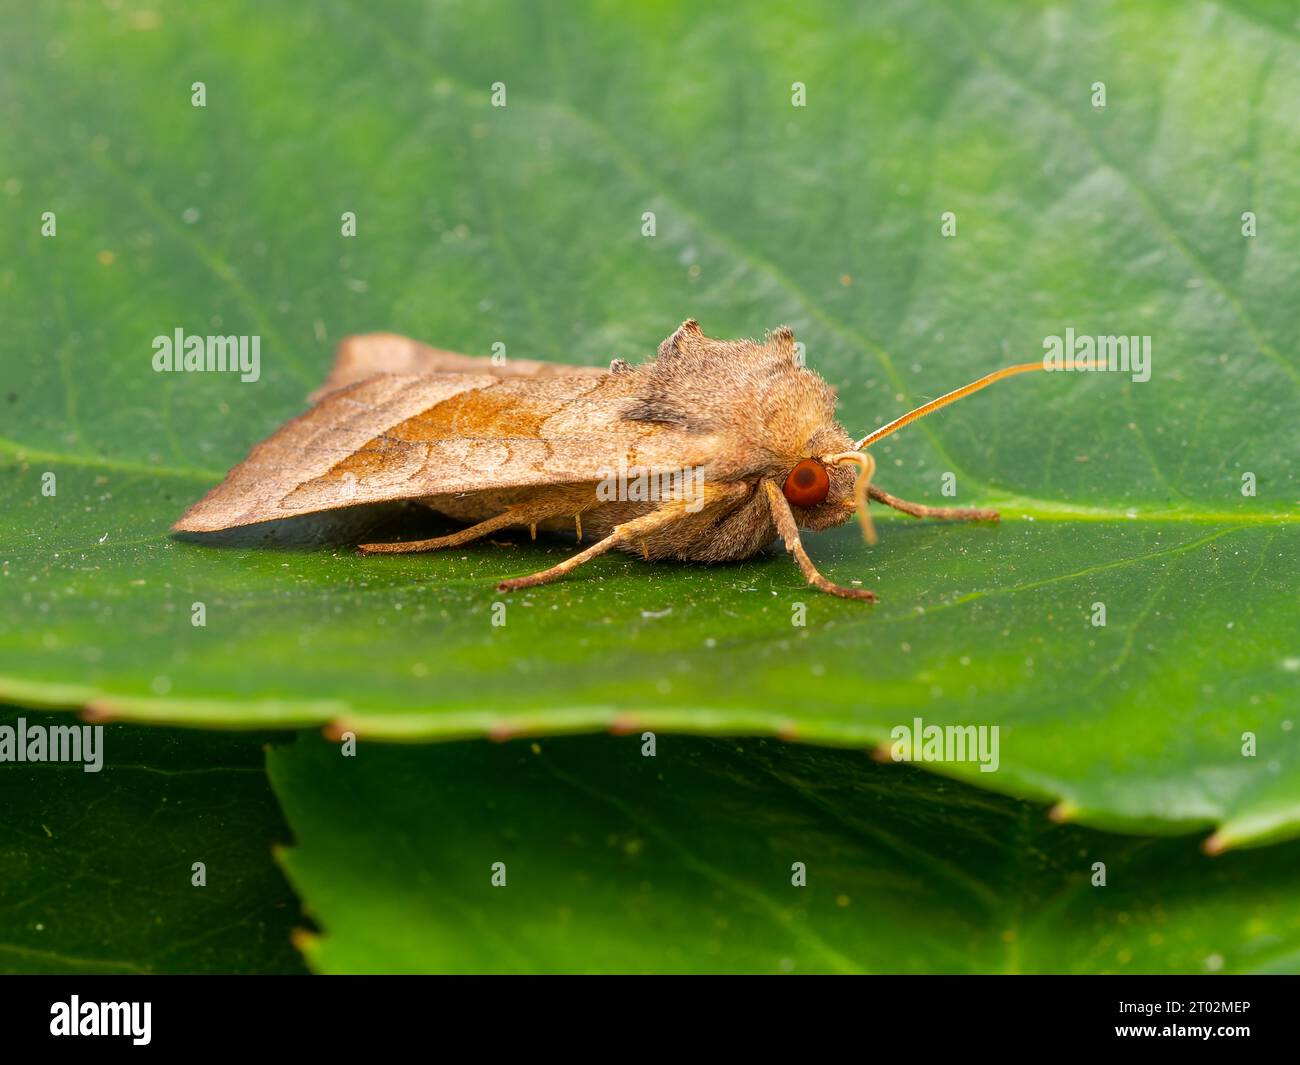 Hydraecia micacea, a rosy rustic moth, resting on a green leaf. Stock Photo